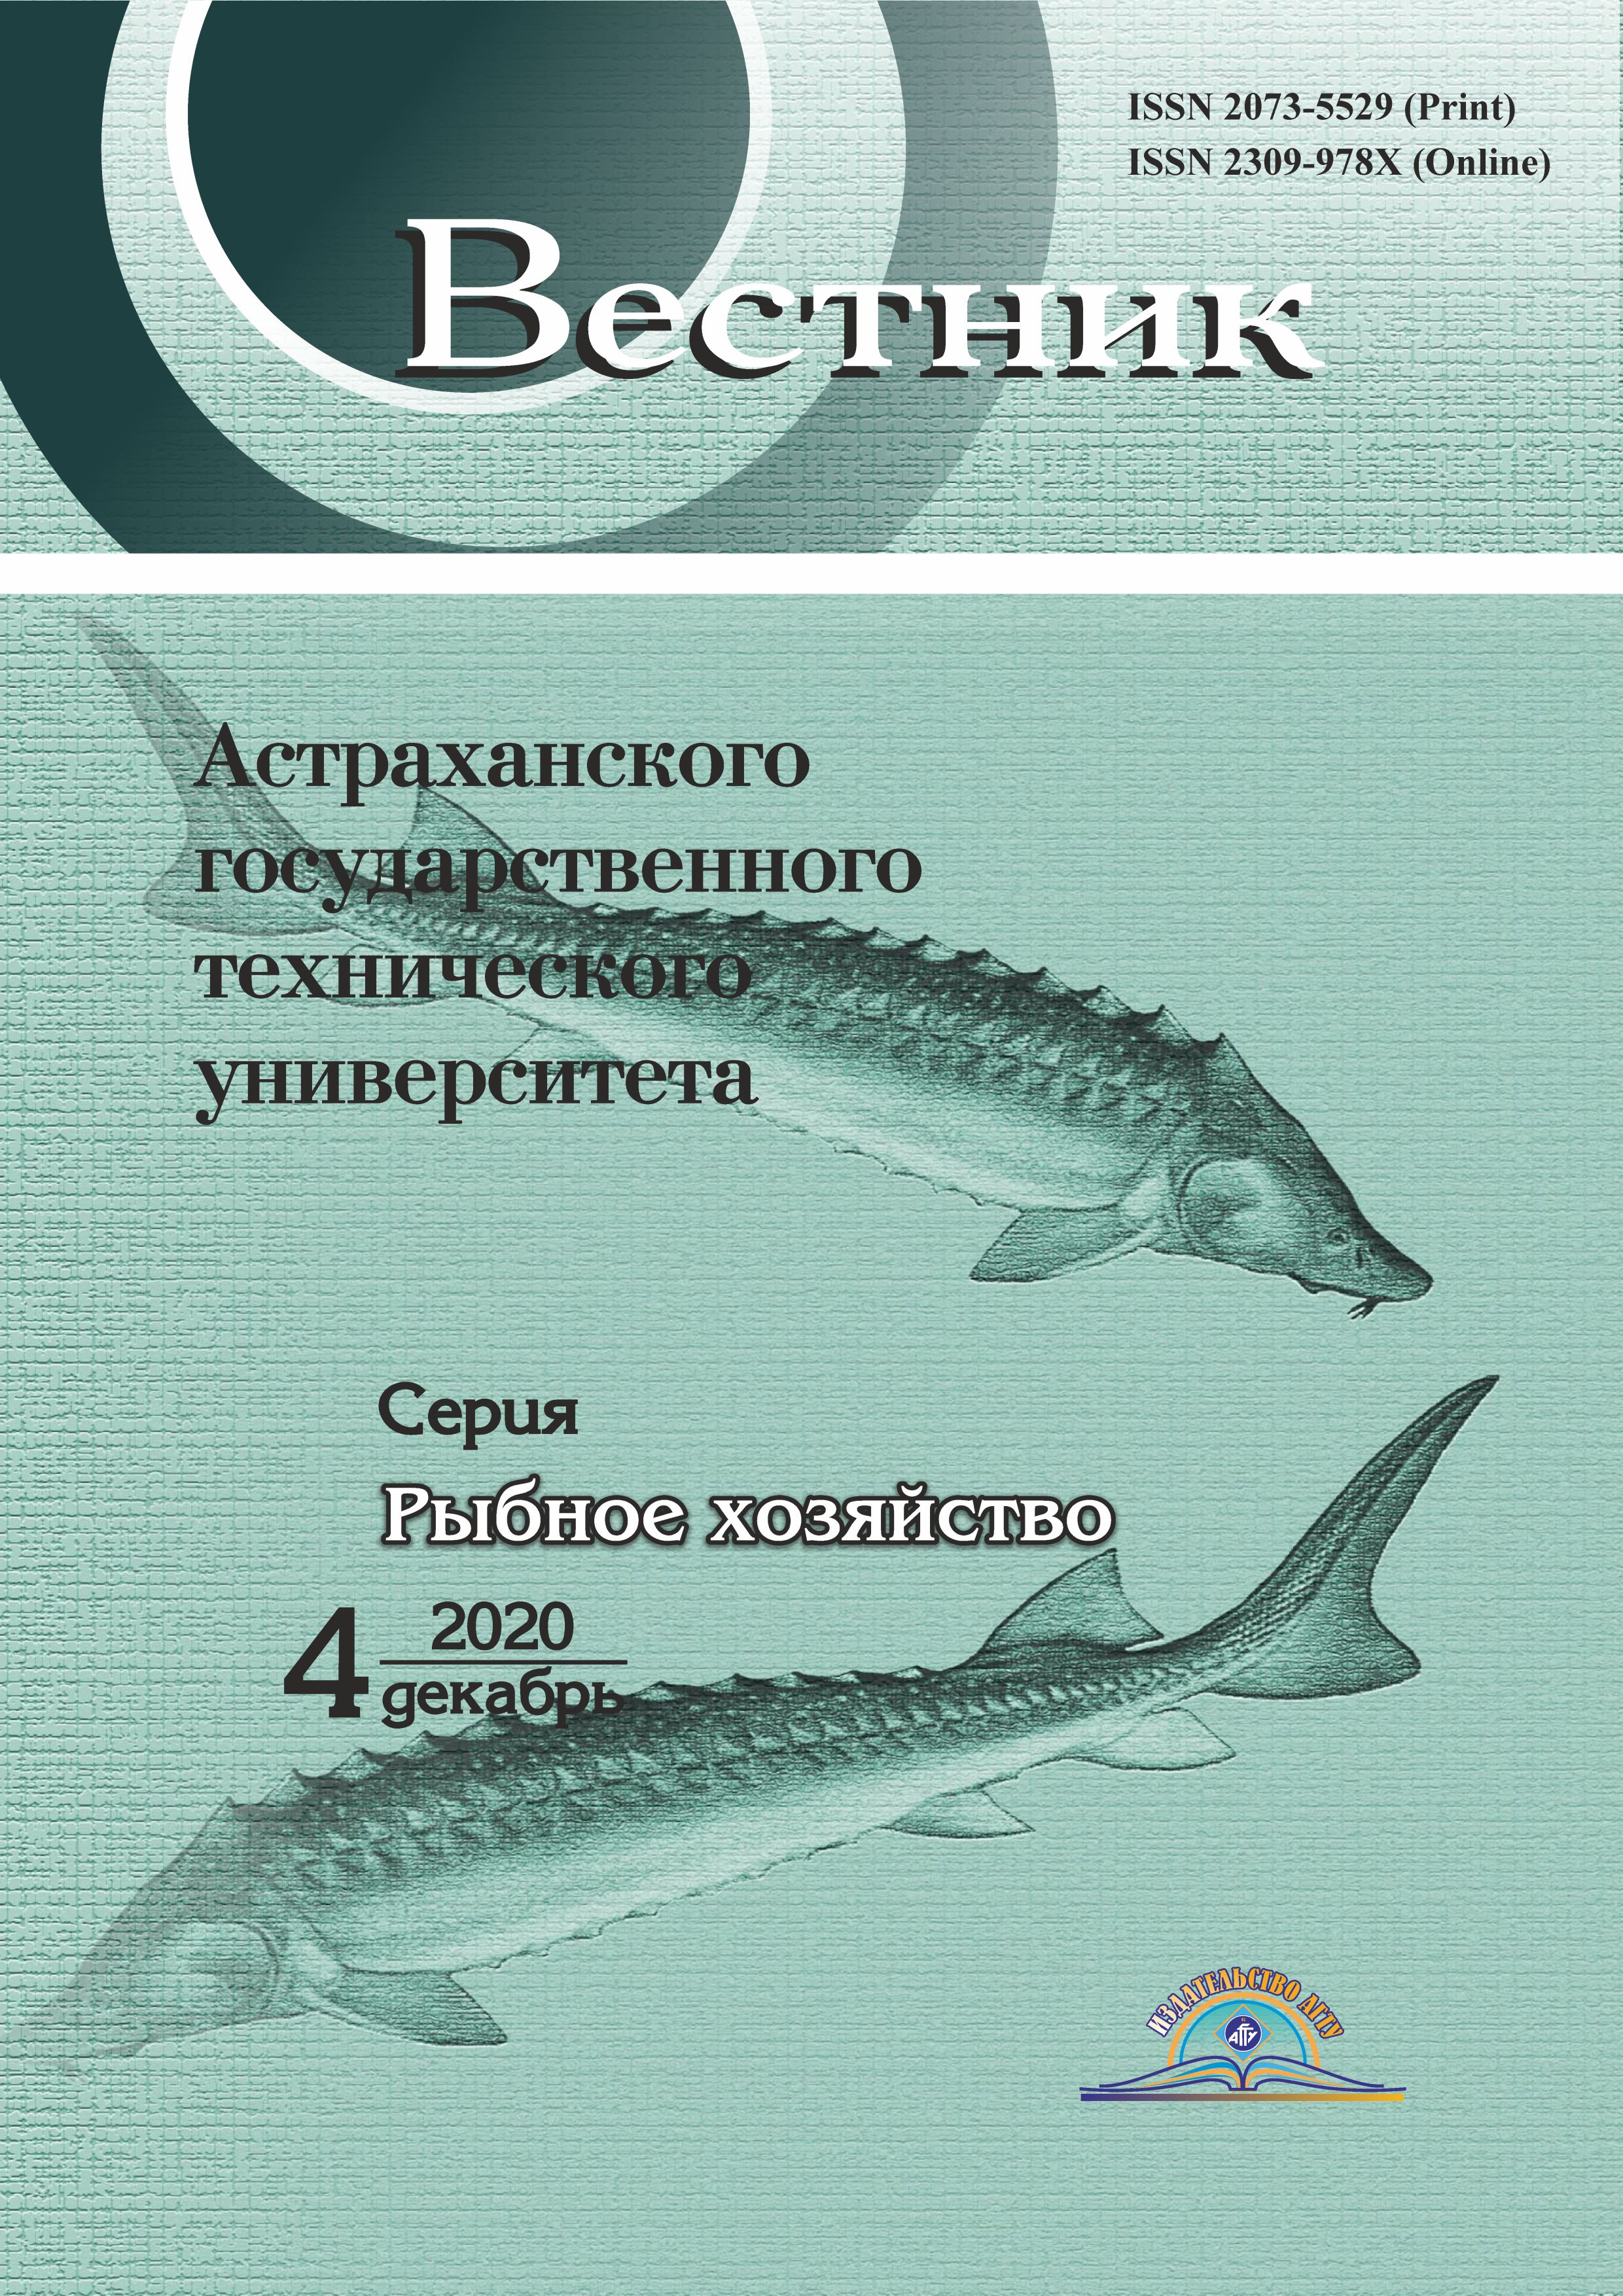                         FORMATION OF SECONDARY IMMUNODEFICIENCY  IN GOBIES IN DIFFERENT REGIONS OF NORTHERN PART  OF CASPIAN SEA
            